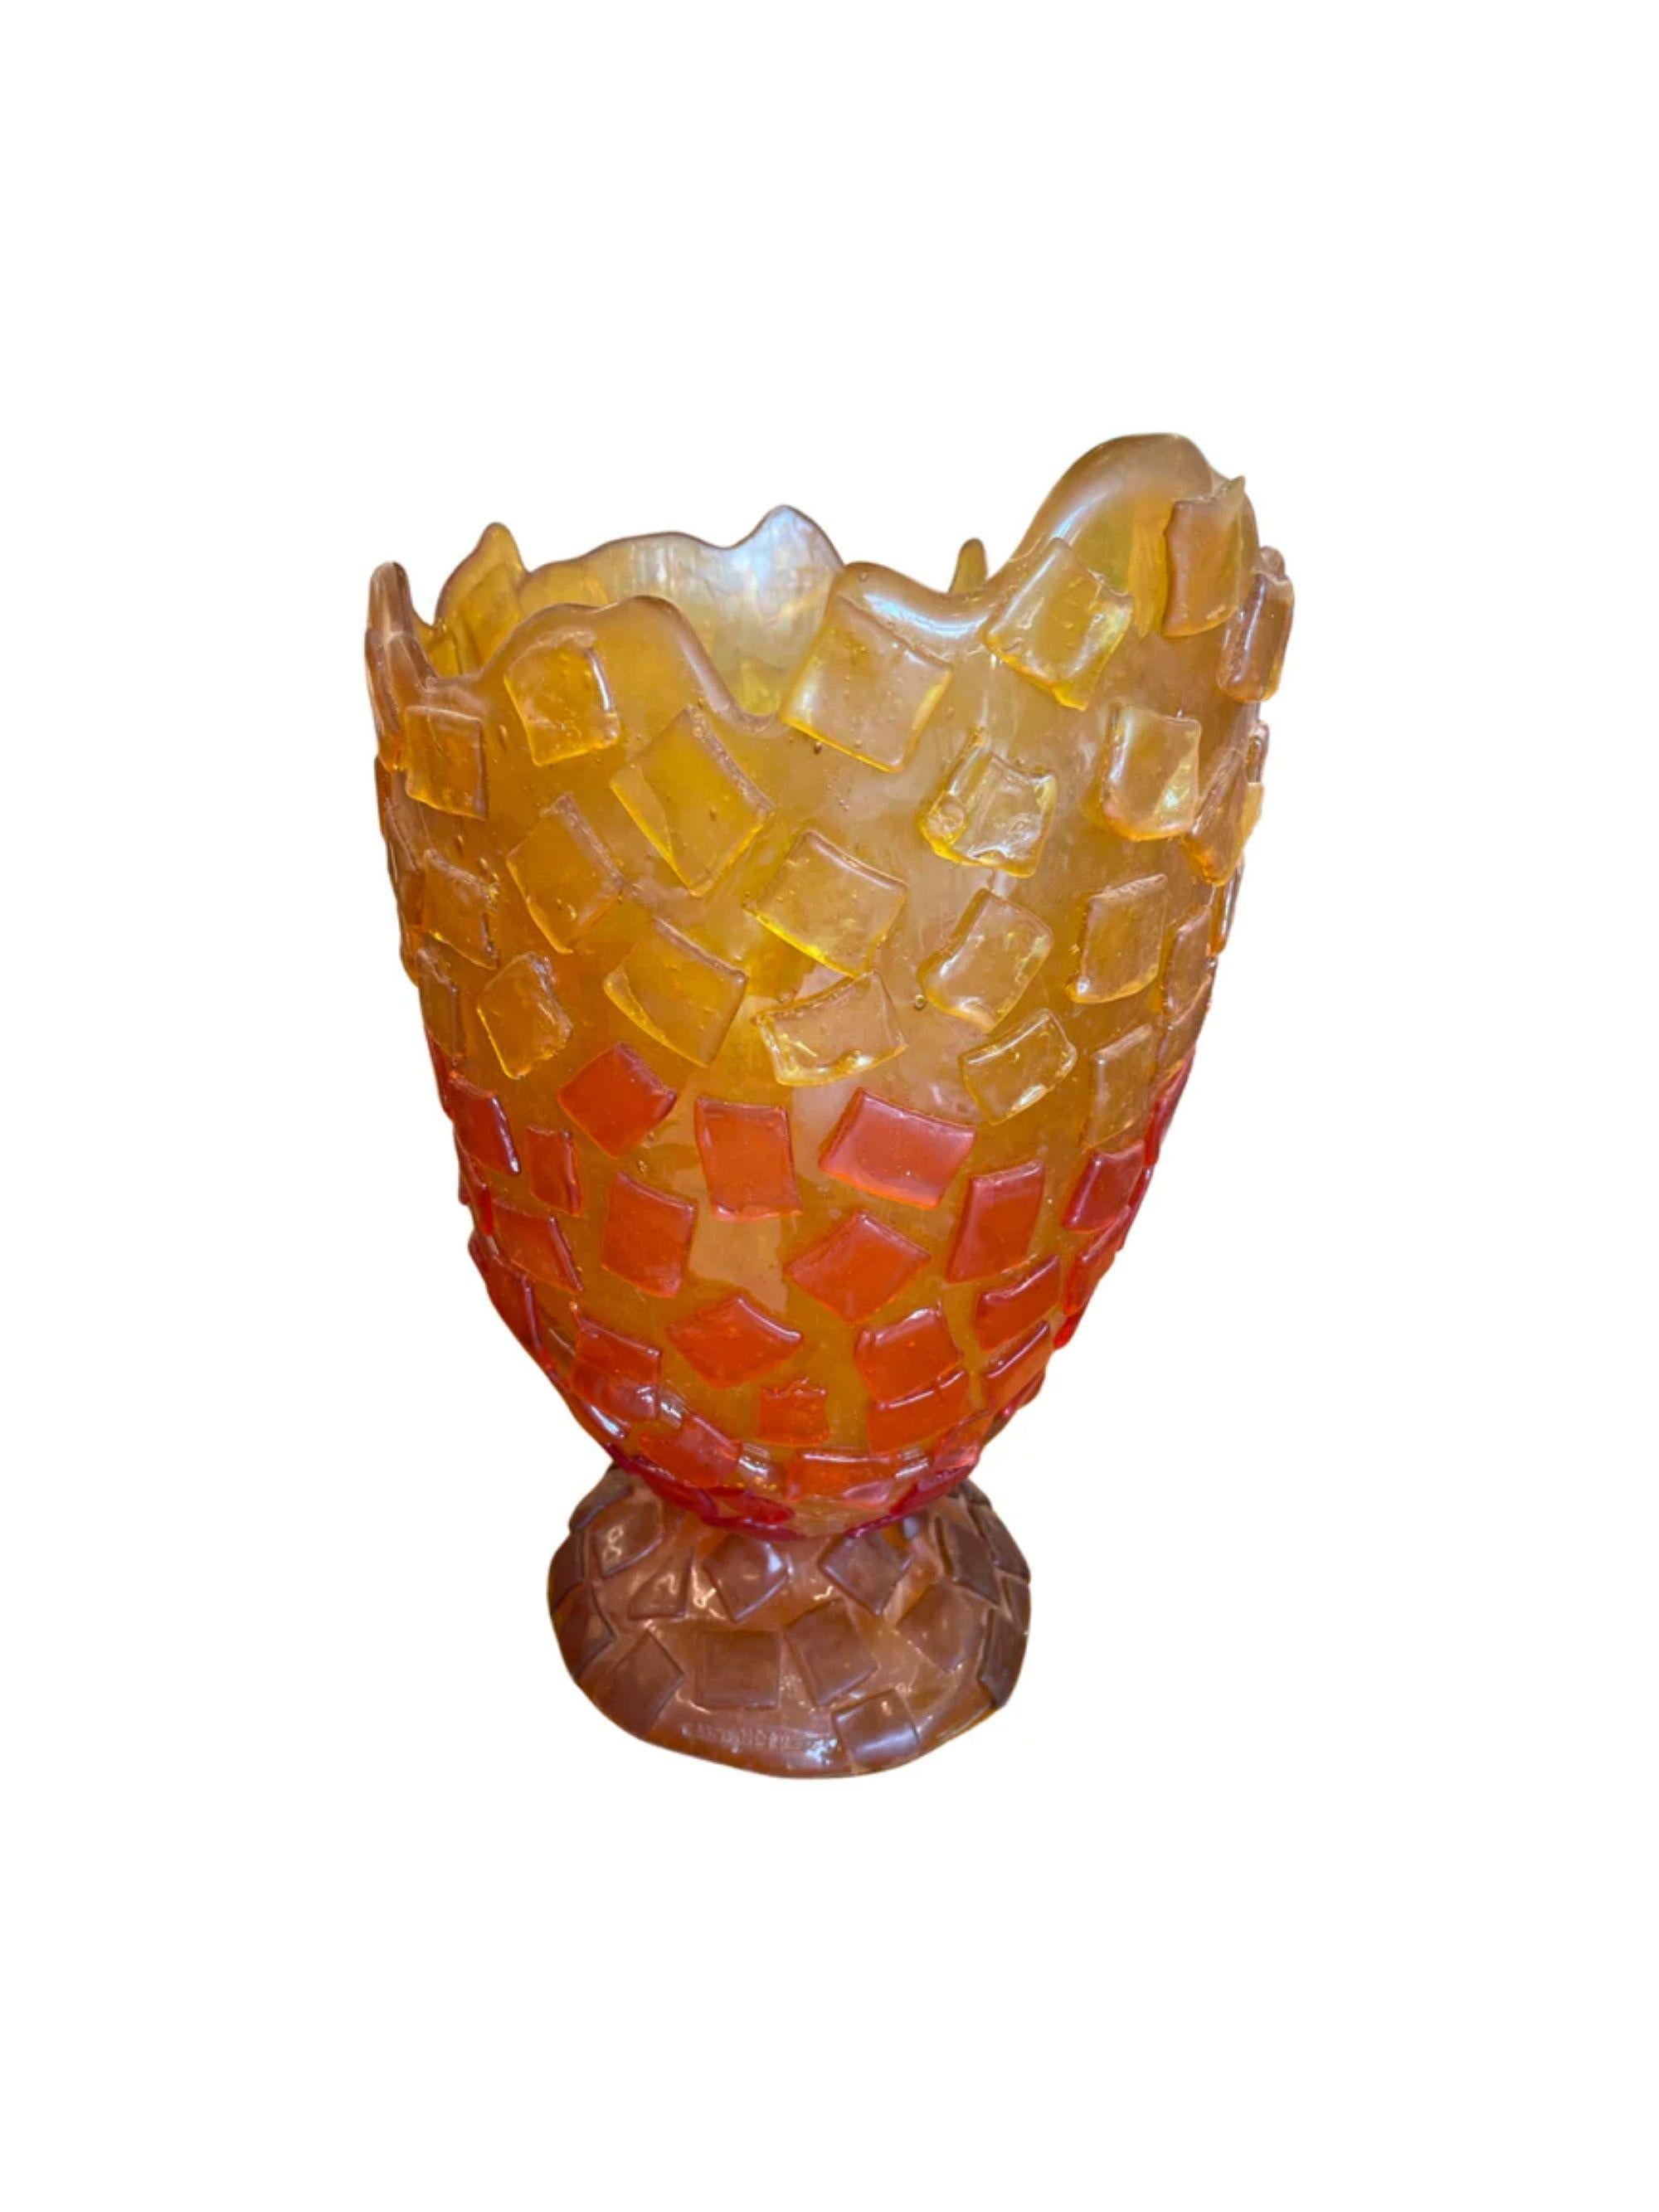 Gaetano Pesce vase for Fish Design collection, Italy, 2017

Additional Information:
Materials: Resin
Dimensions: 14 1/2” H x 9” Dia.
Condition: Excellent.